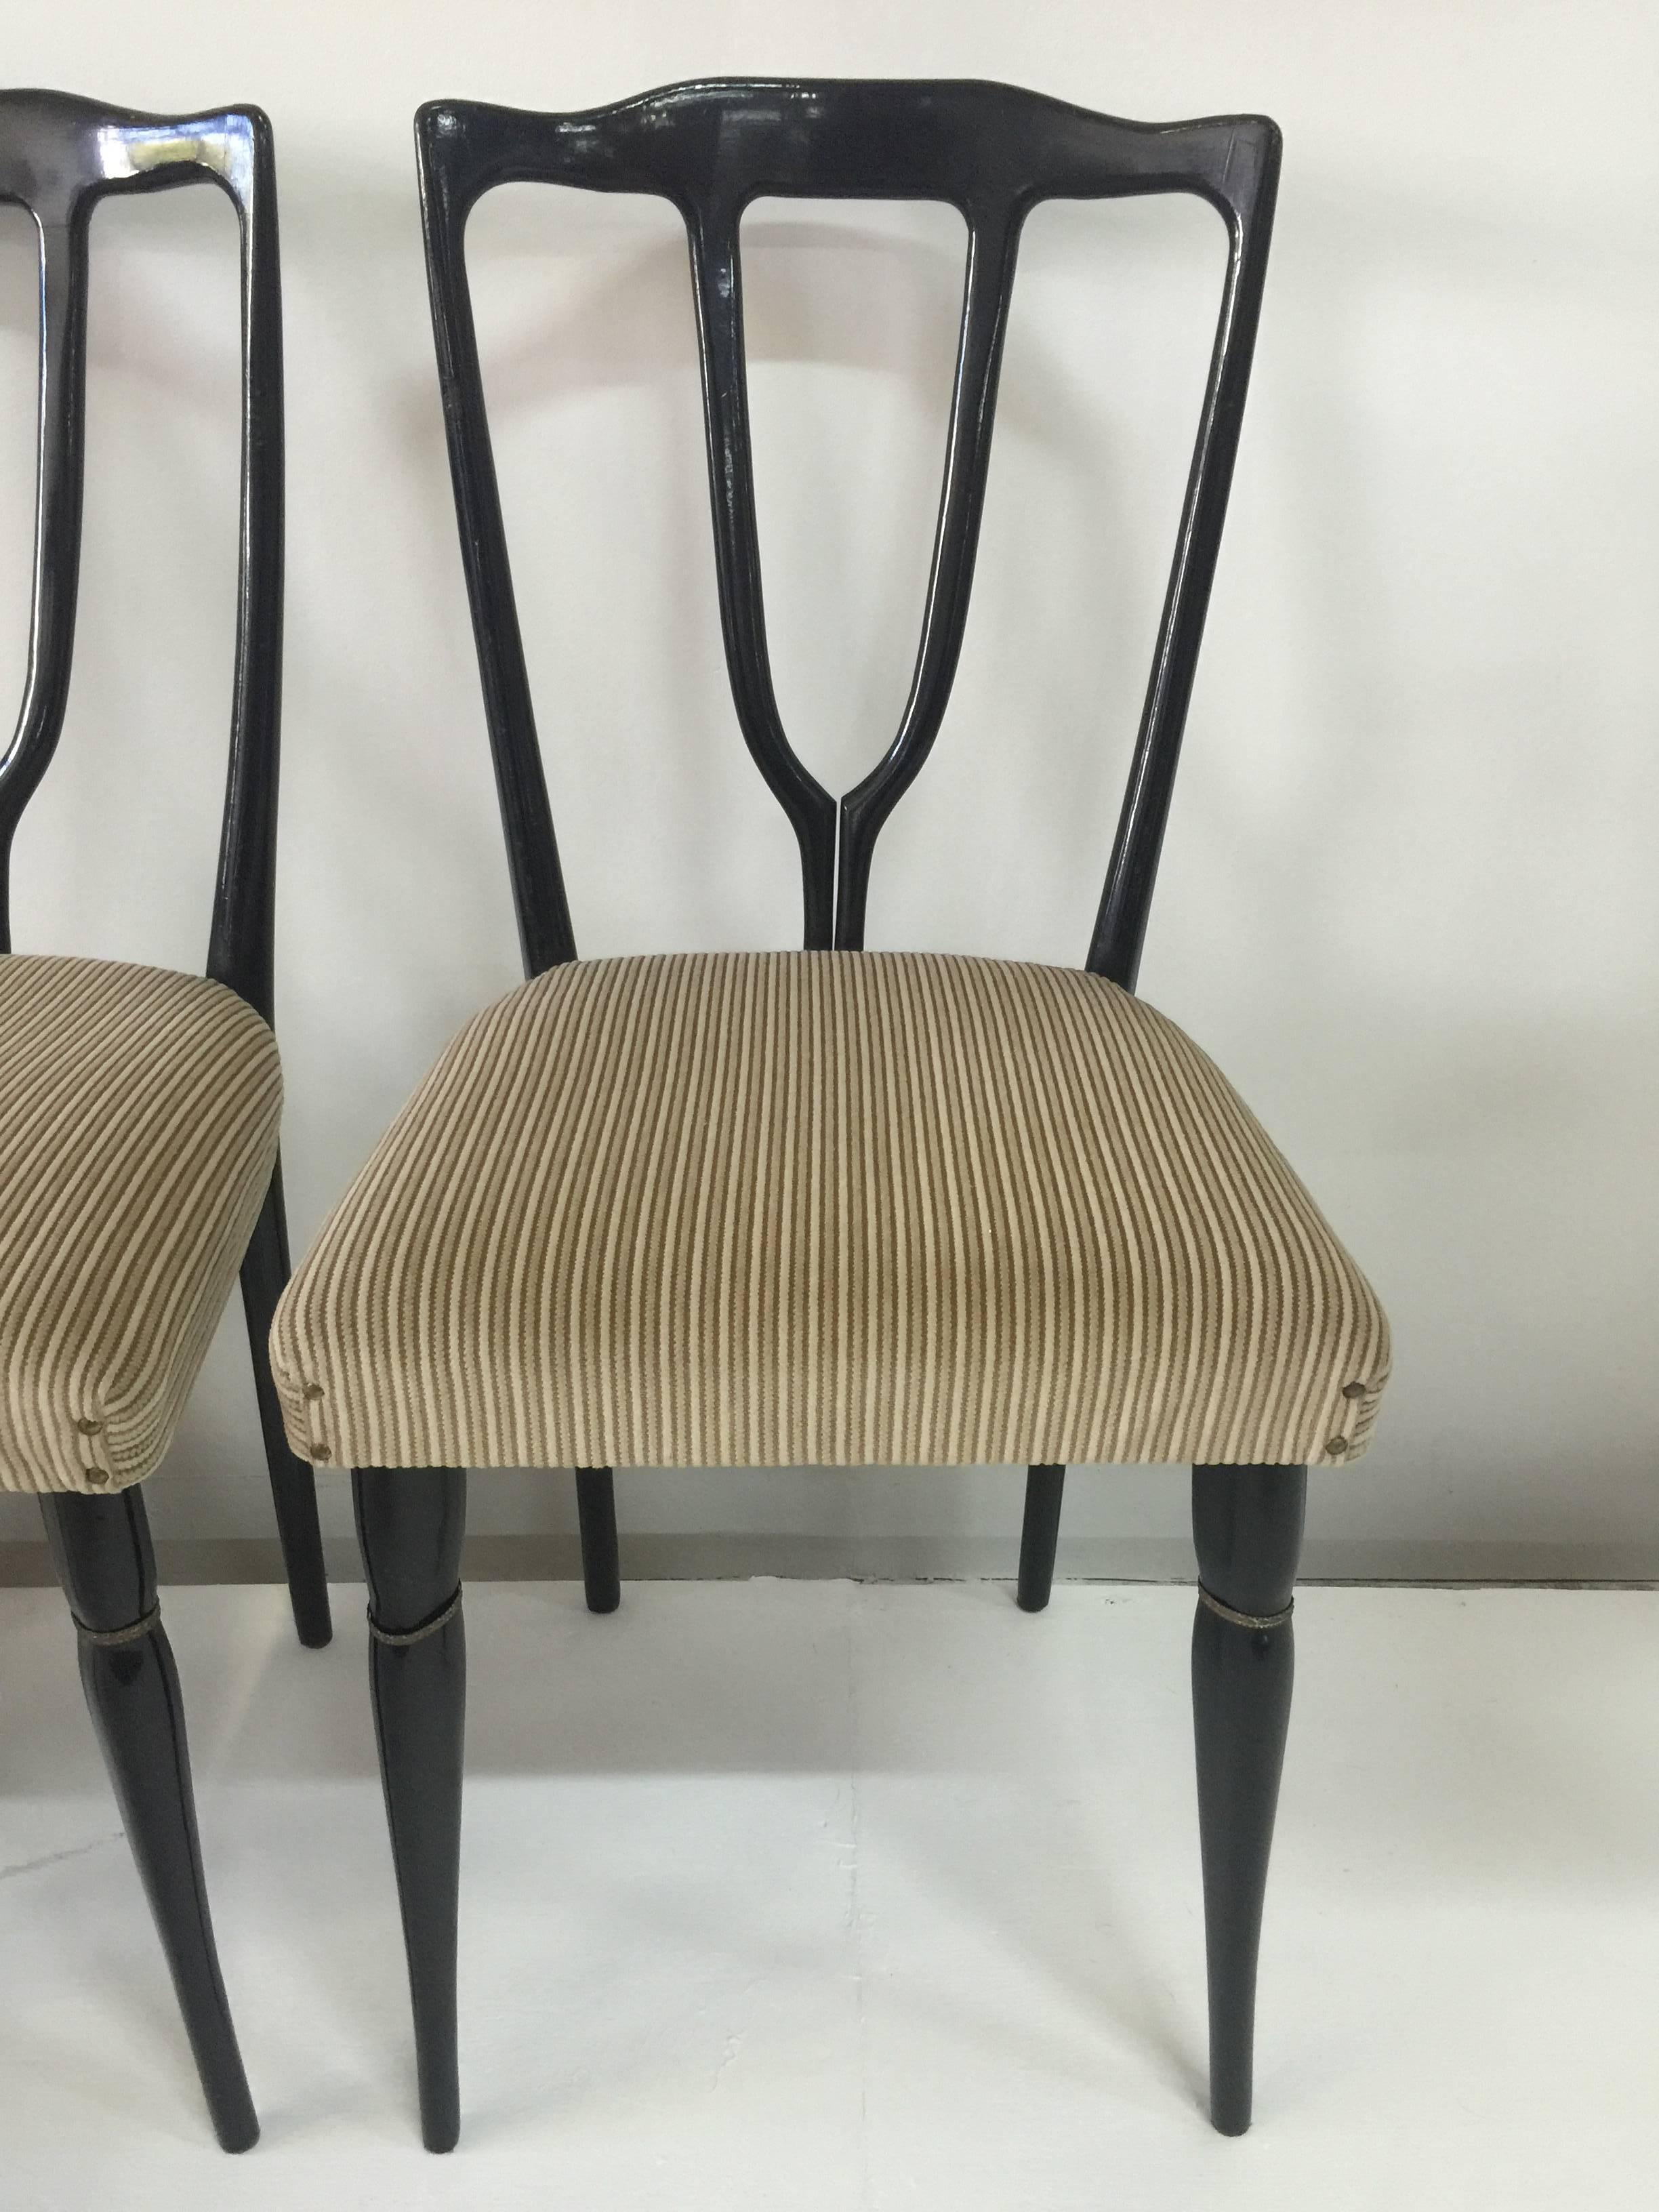 Lacquered Six Vintage Italian Wish-Bone Dining Chairs